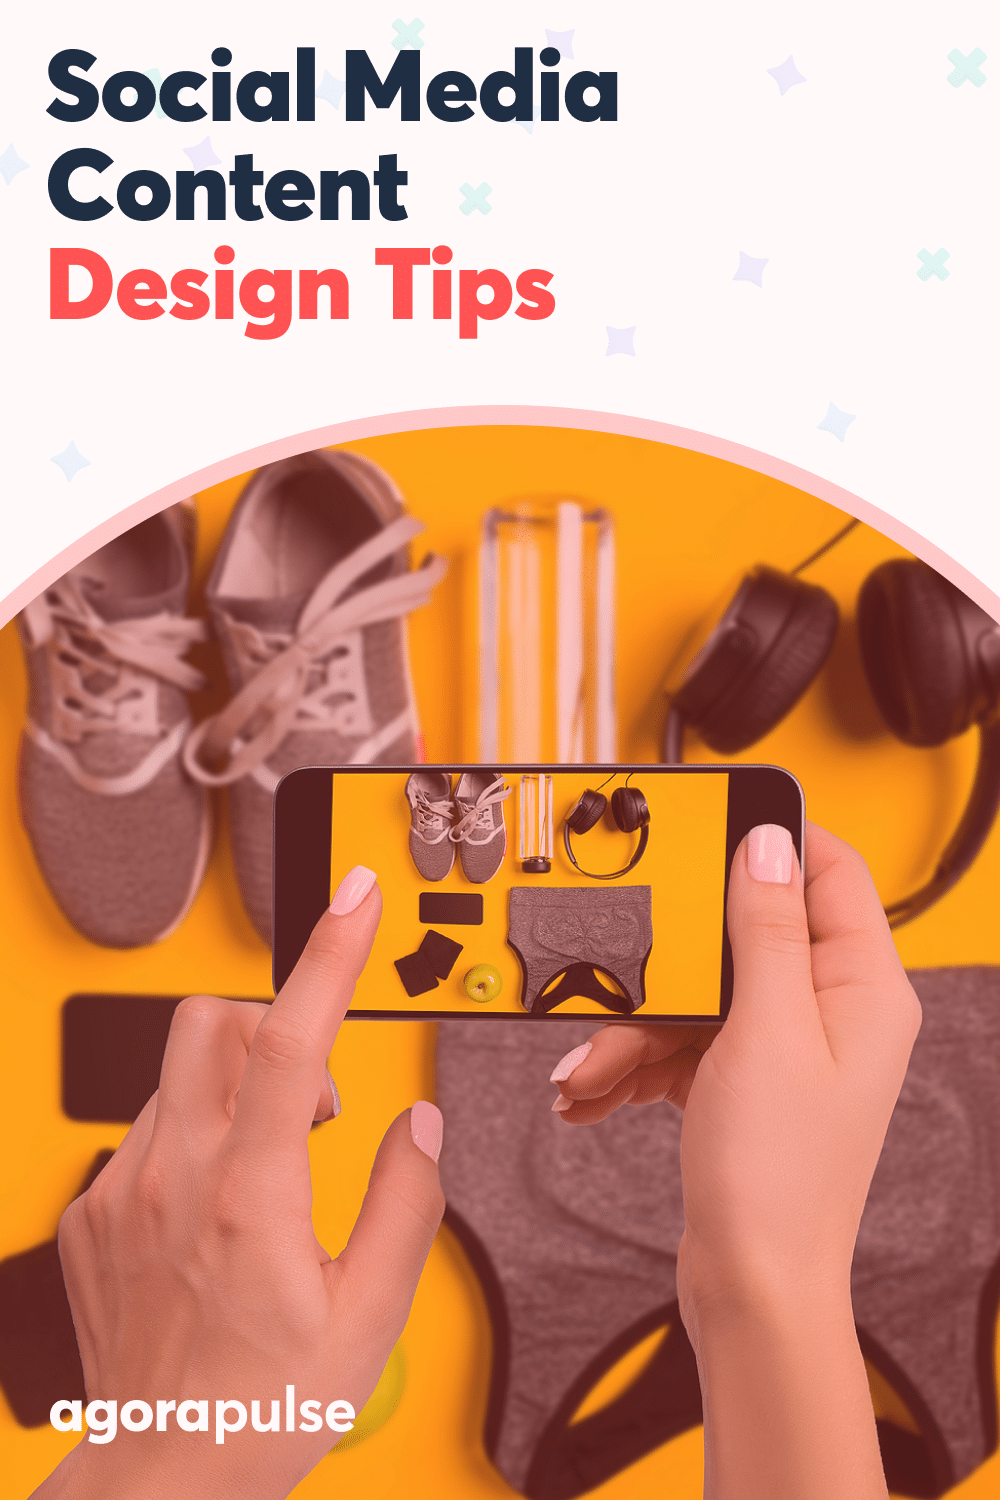 Social Media Design: Tips to Make Sure Your Social Content Shines